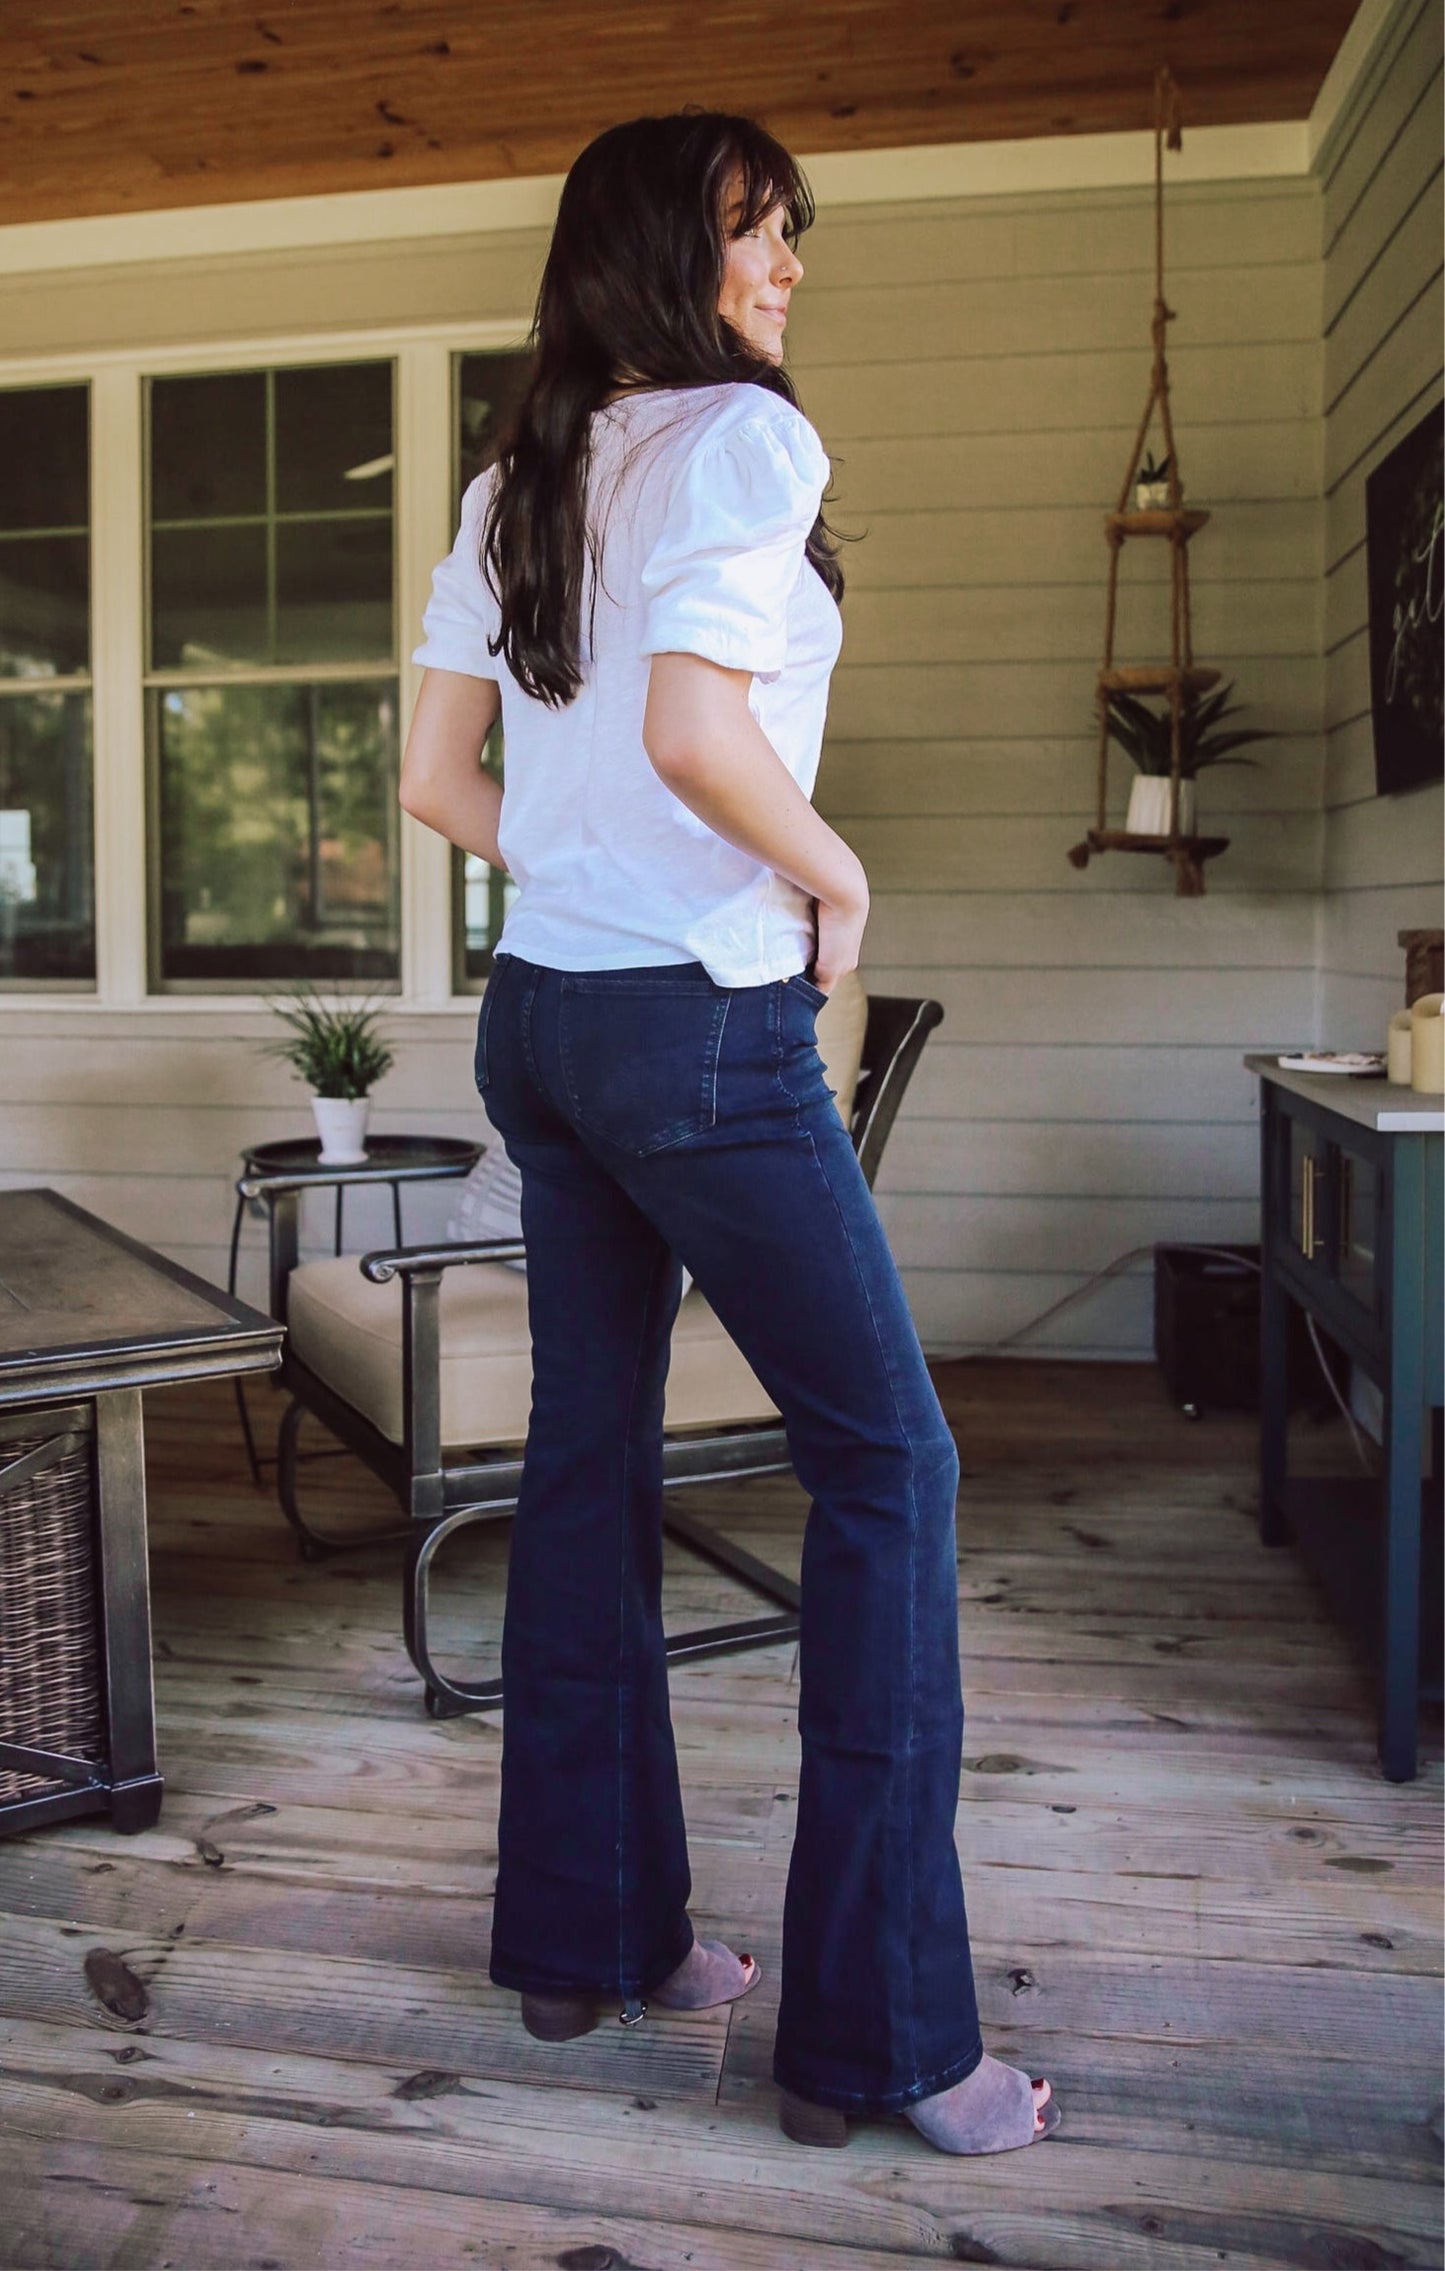 Best Seller! Rosa Flared High Rise Jean - Cotton and Grain